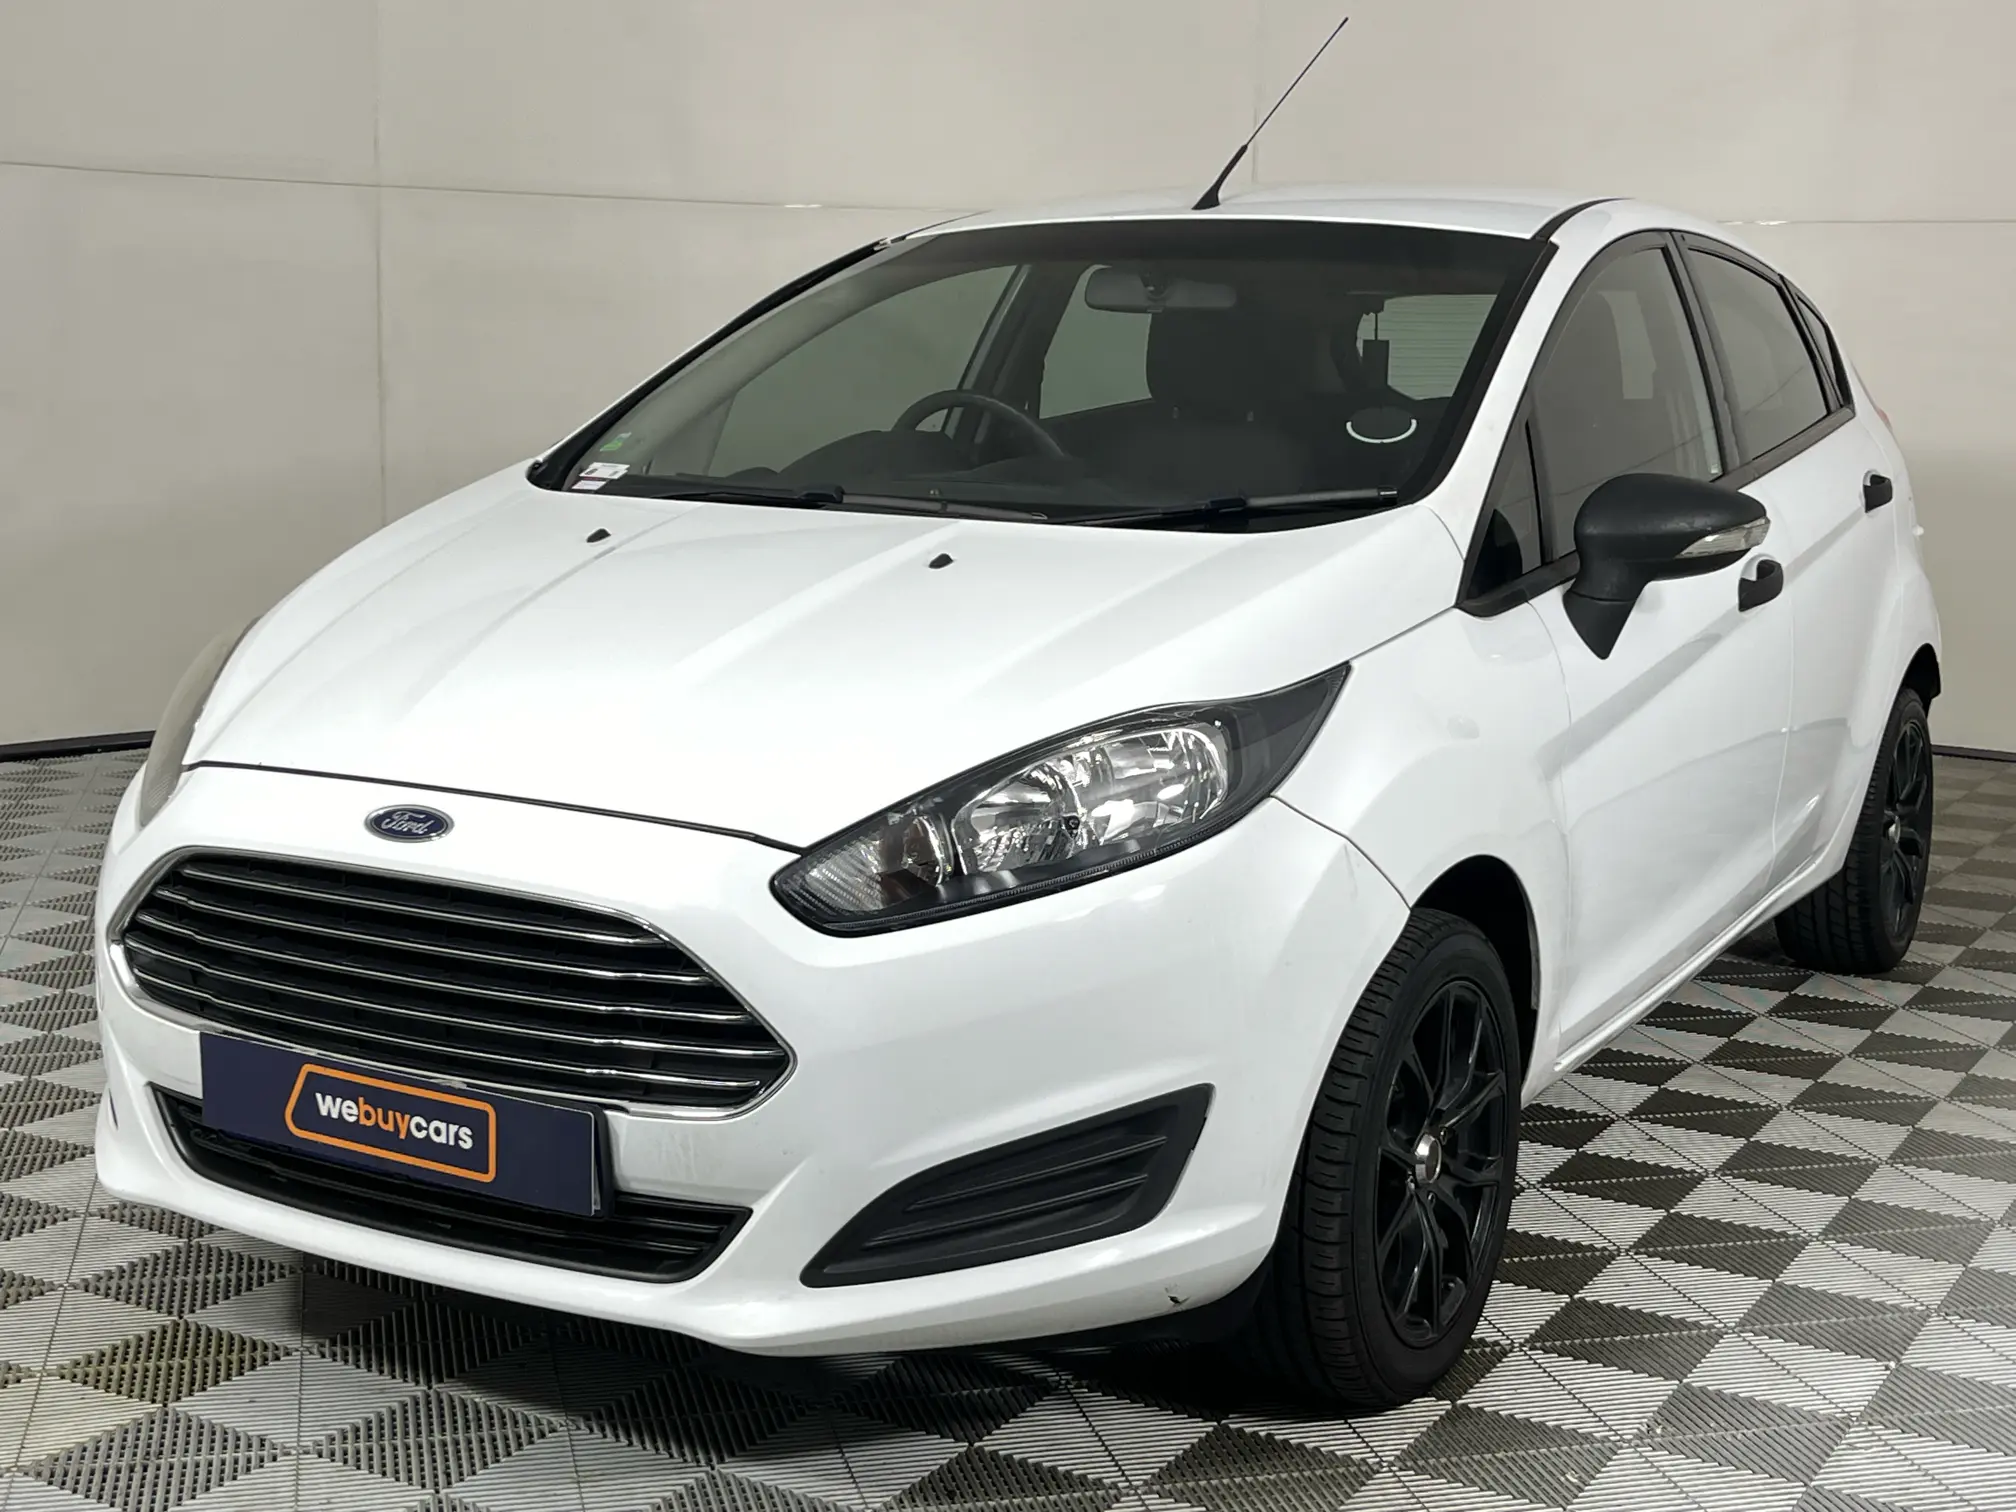 2013 Ford Fiesta 1.4 Ambiente 5 DR